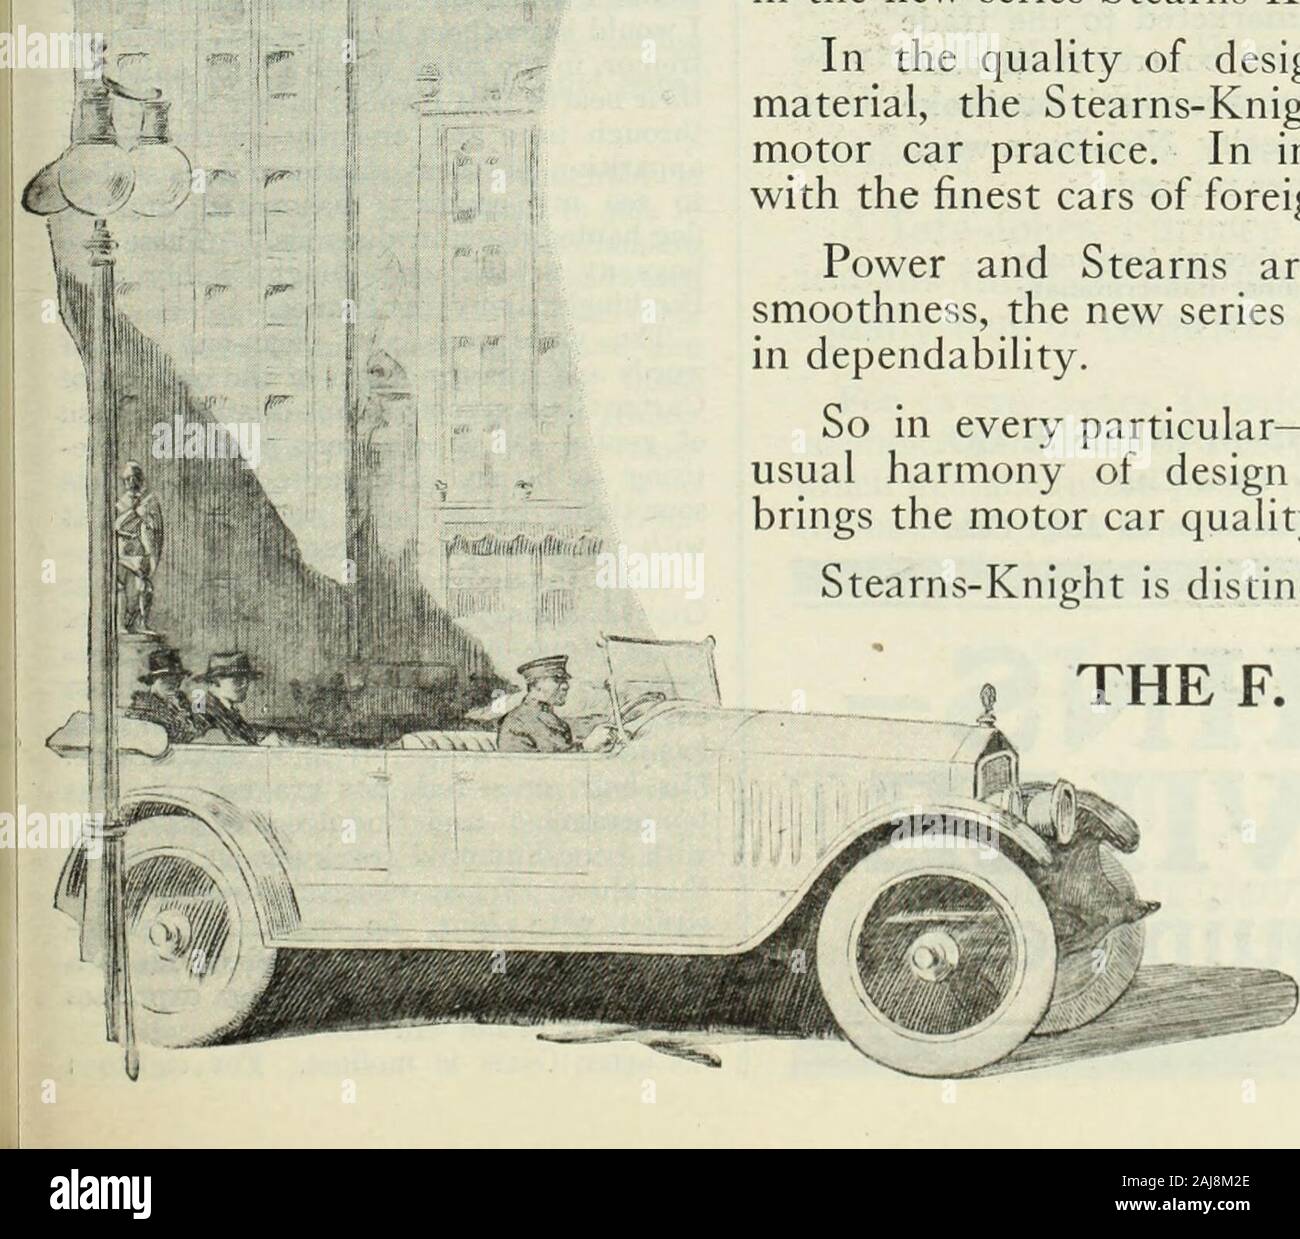 The literary digest . Notable Achievement Reflected in New Series Stearns N 1911 it was Stearns privilege to introduce Americasfirst Knight-motored car to the motoring pubHc. Eachyear witnessed a wider acknowledgment of the remark-able performance and high quality of this car. Then war came. It made insistent demands upon ever^^ lineof endeavor. Motor car makers quickly turned to war production. Because of the high ideals which surrounded every designingand manufacturing operation, the Stearns organization was chosenfor the production of Rolls-Royce aviation motors in America. This notable com Stock Photo